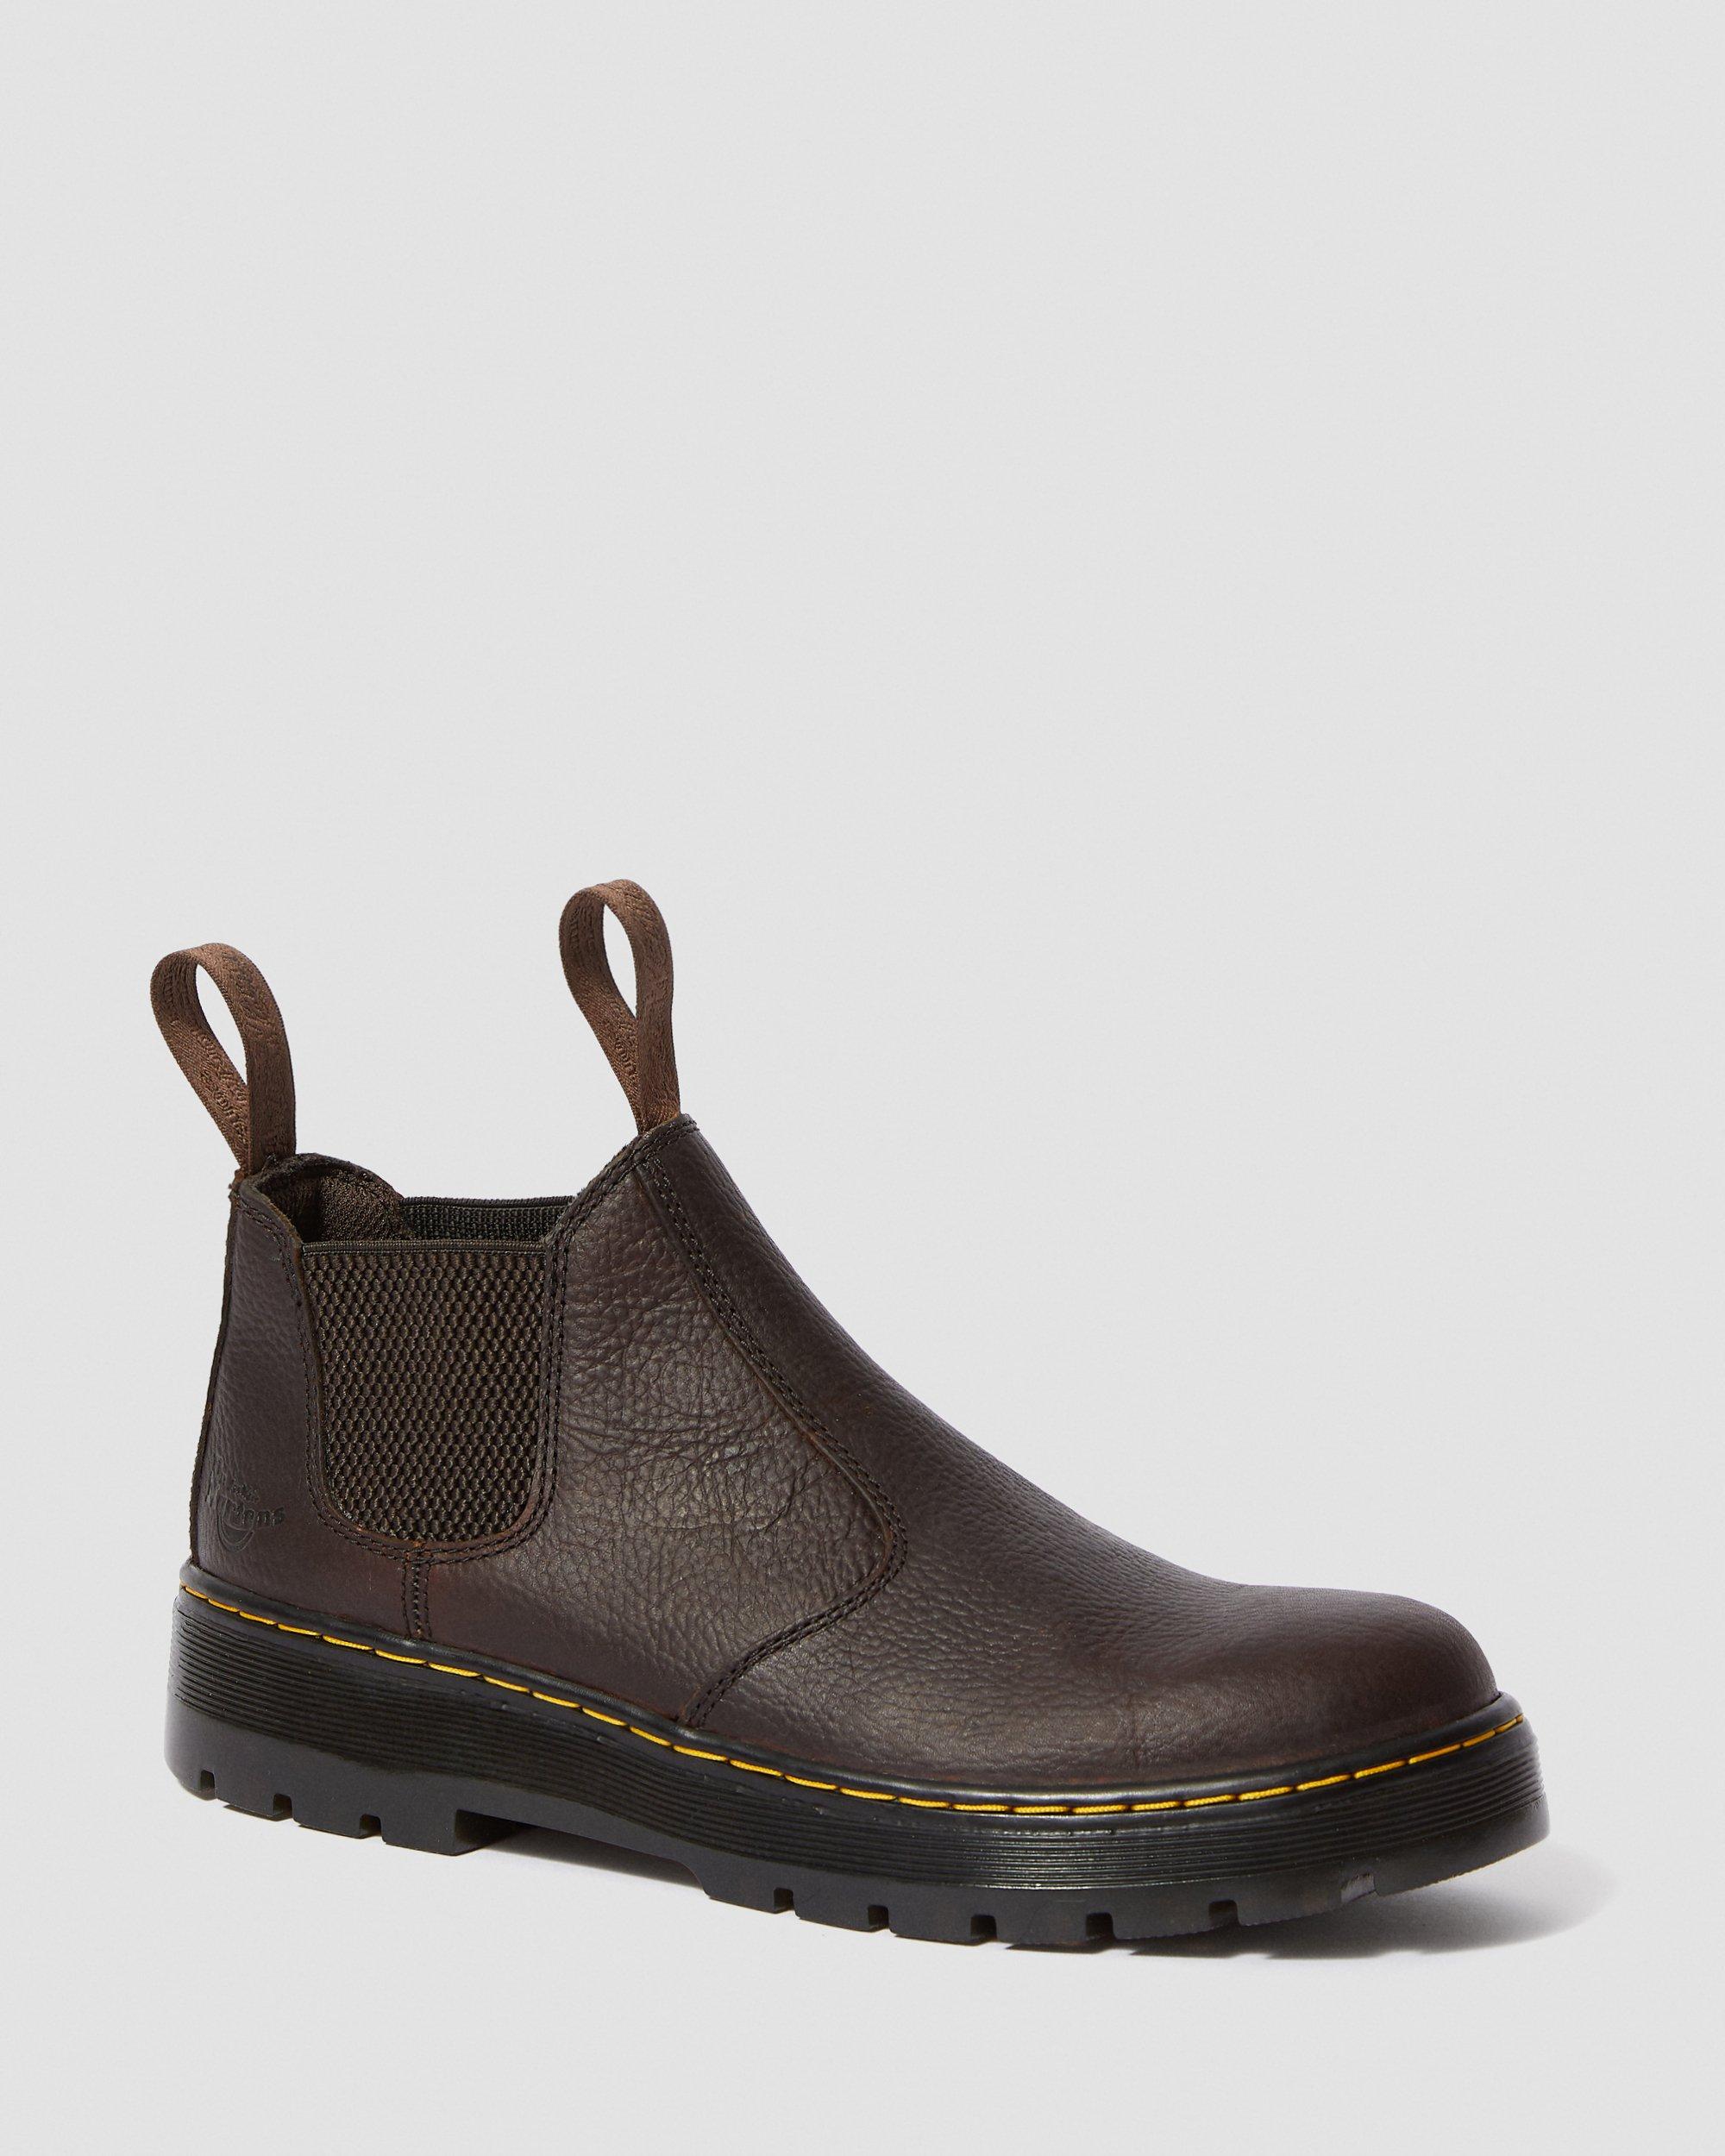 HARDIE BEAR TRACK CHELSEA BOOTS | Dr 